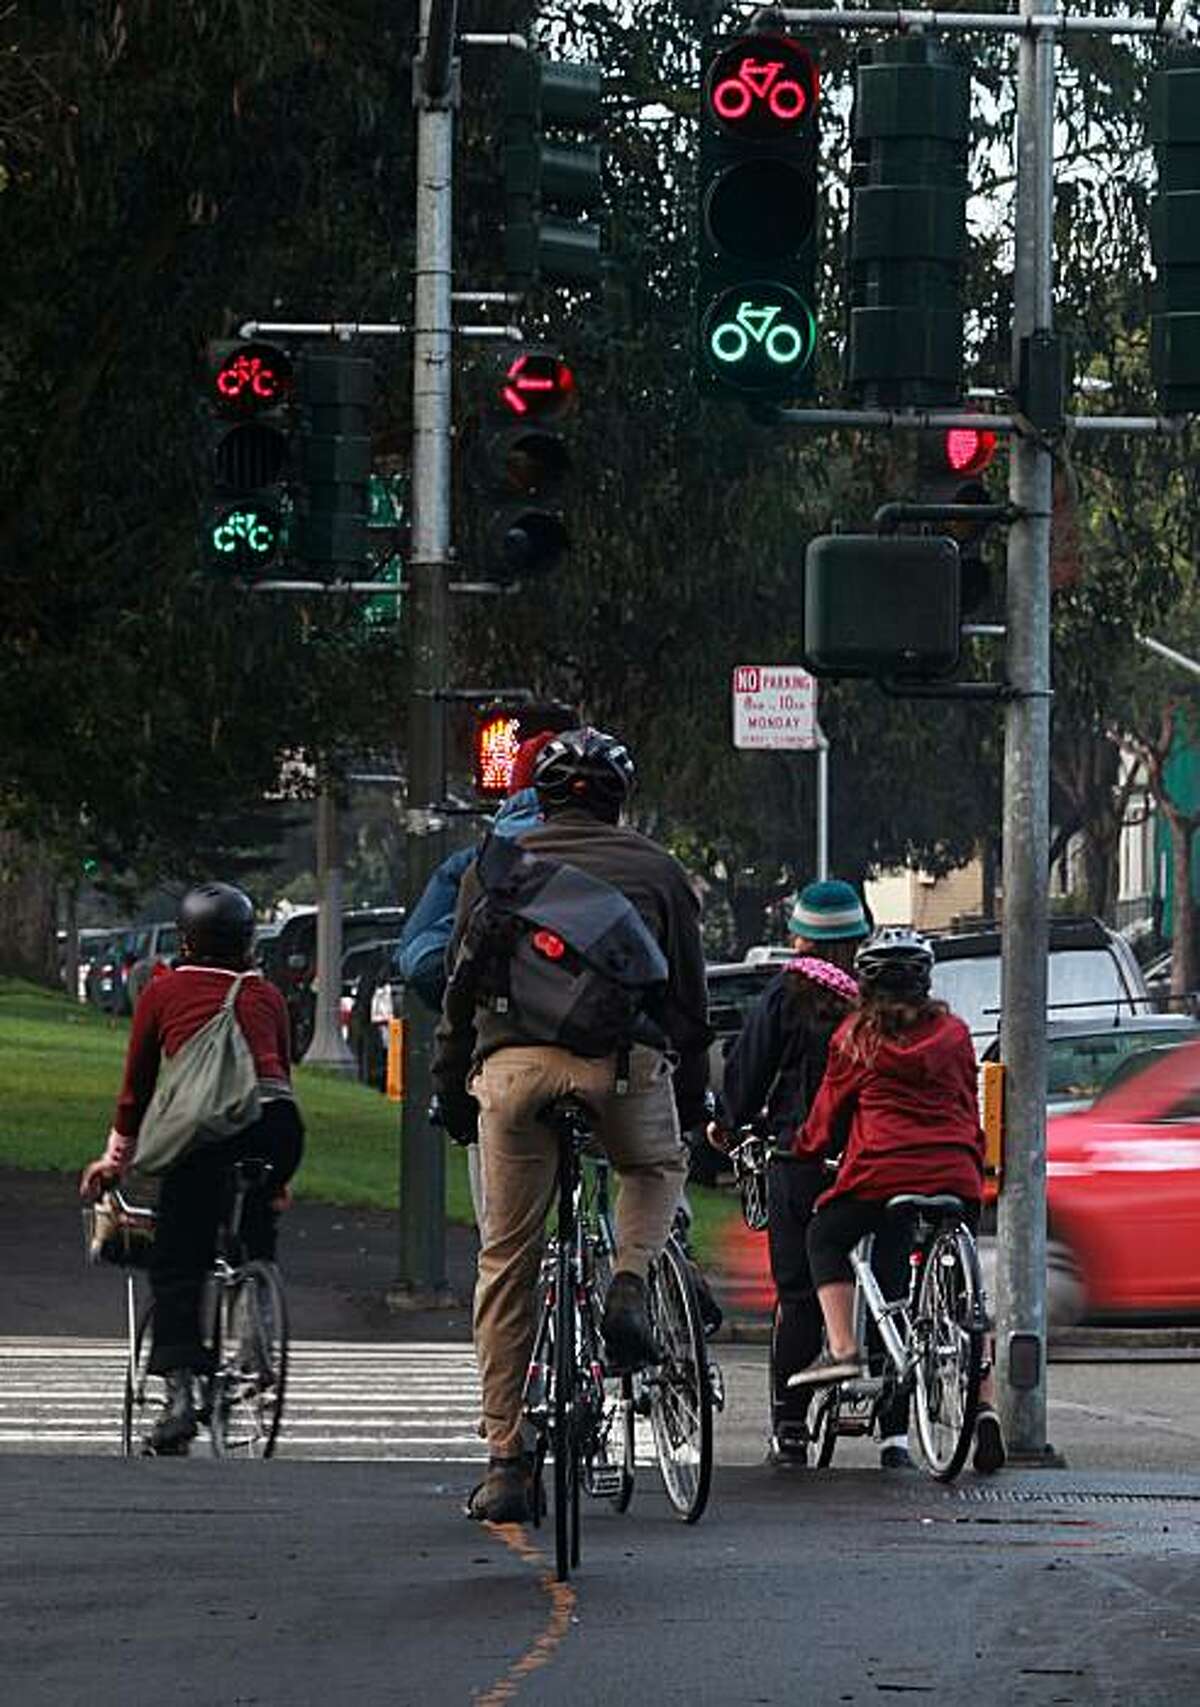 Cyclists wait for the traffic light between signals on Fell at Masonic streets in San Francisco, Calif., on Wednesday, December 15, 2010.